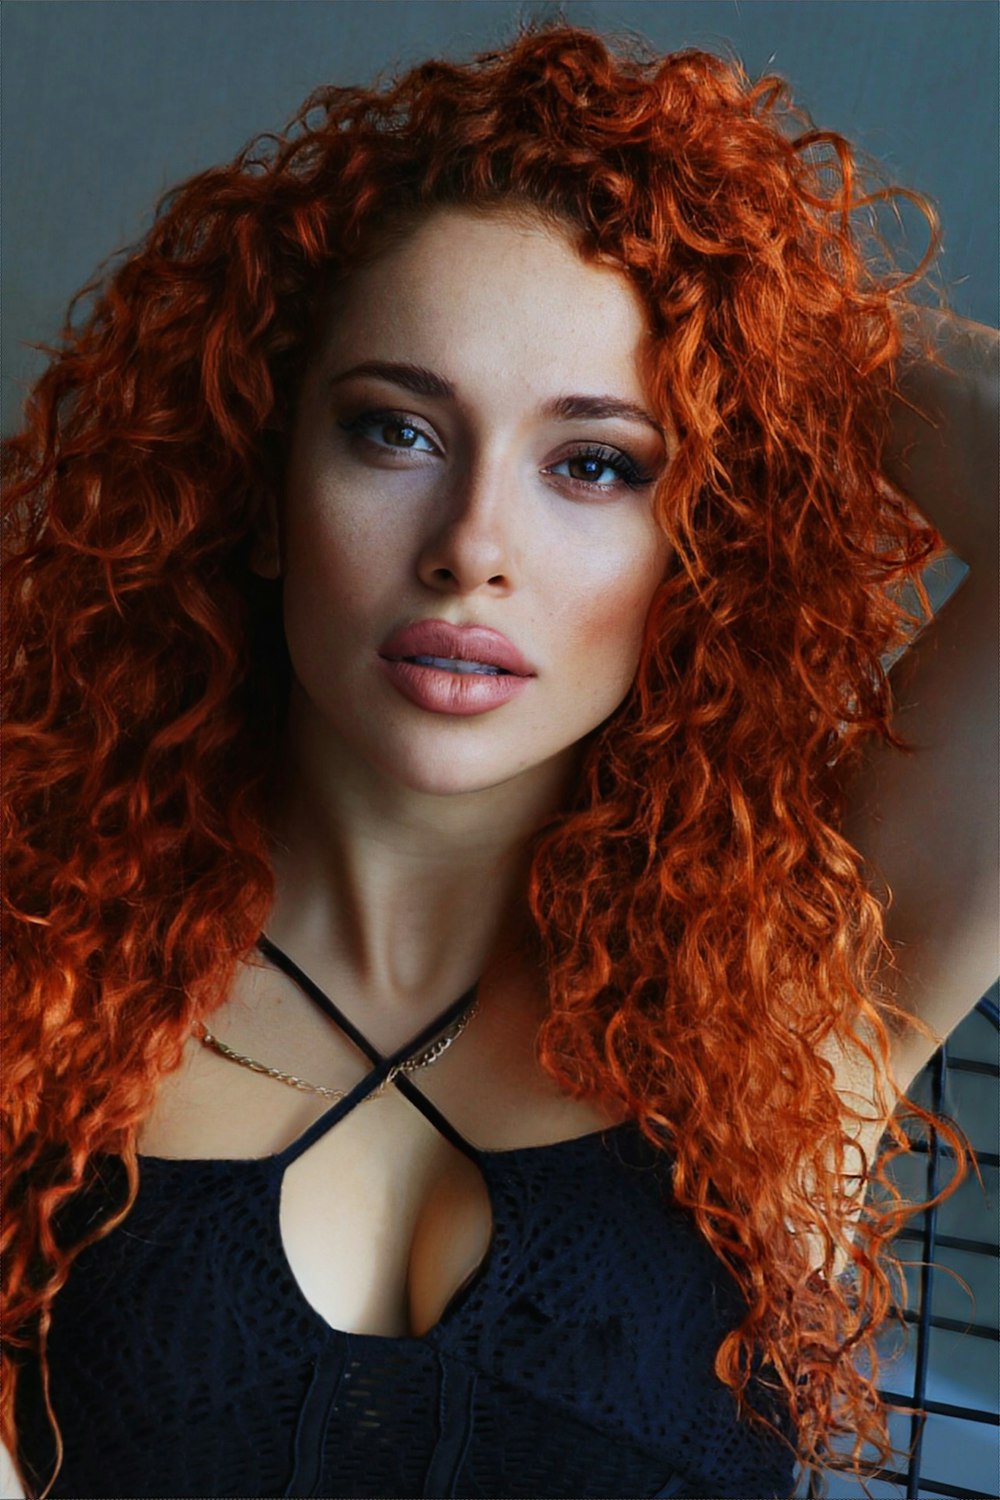 a woman with red curly hair posing for a picture